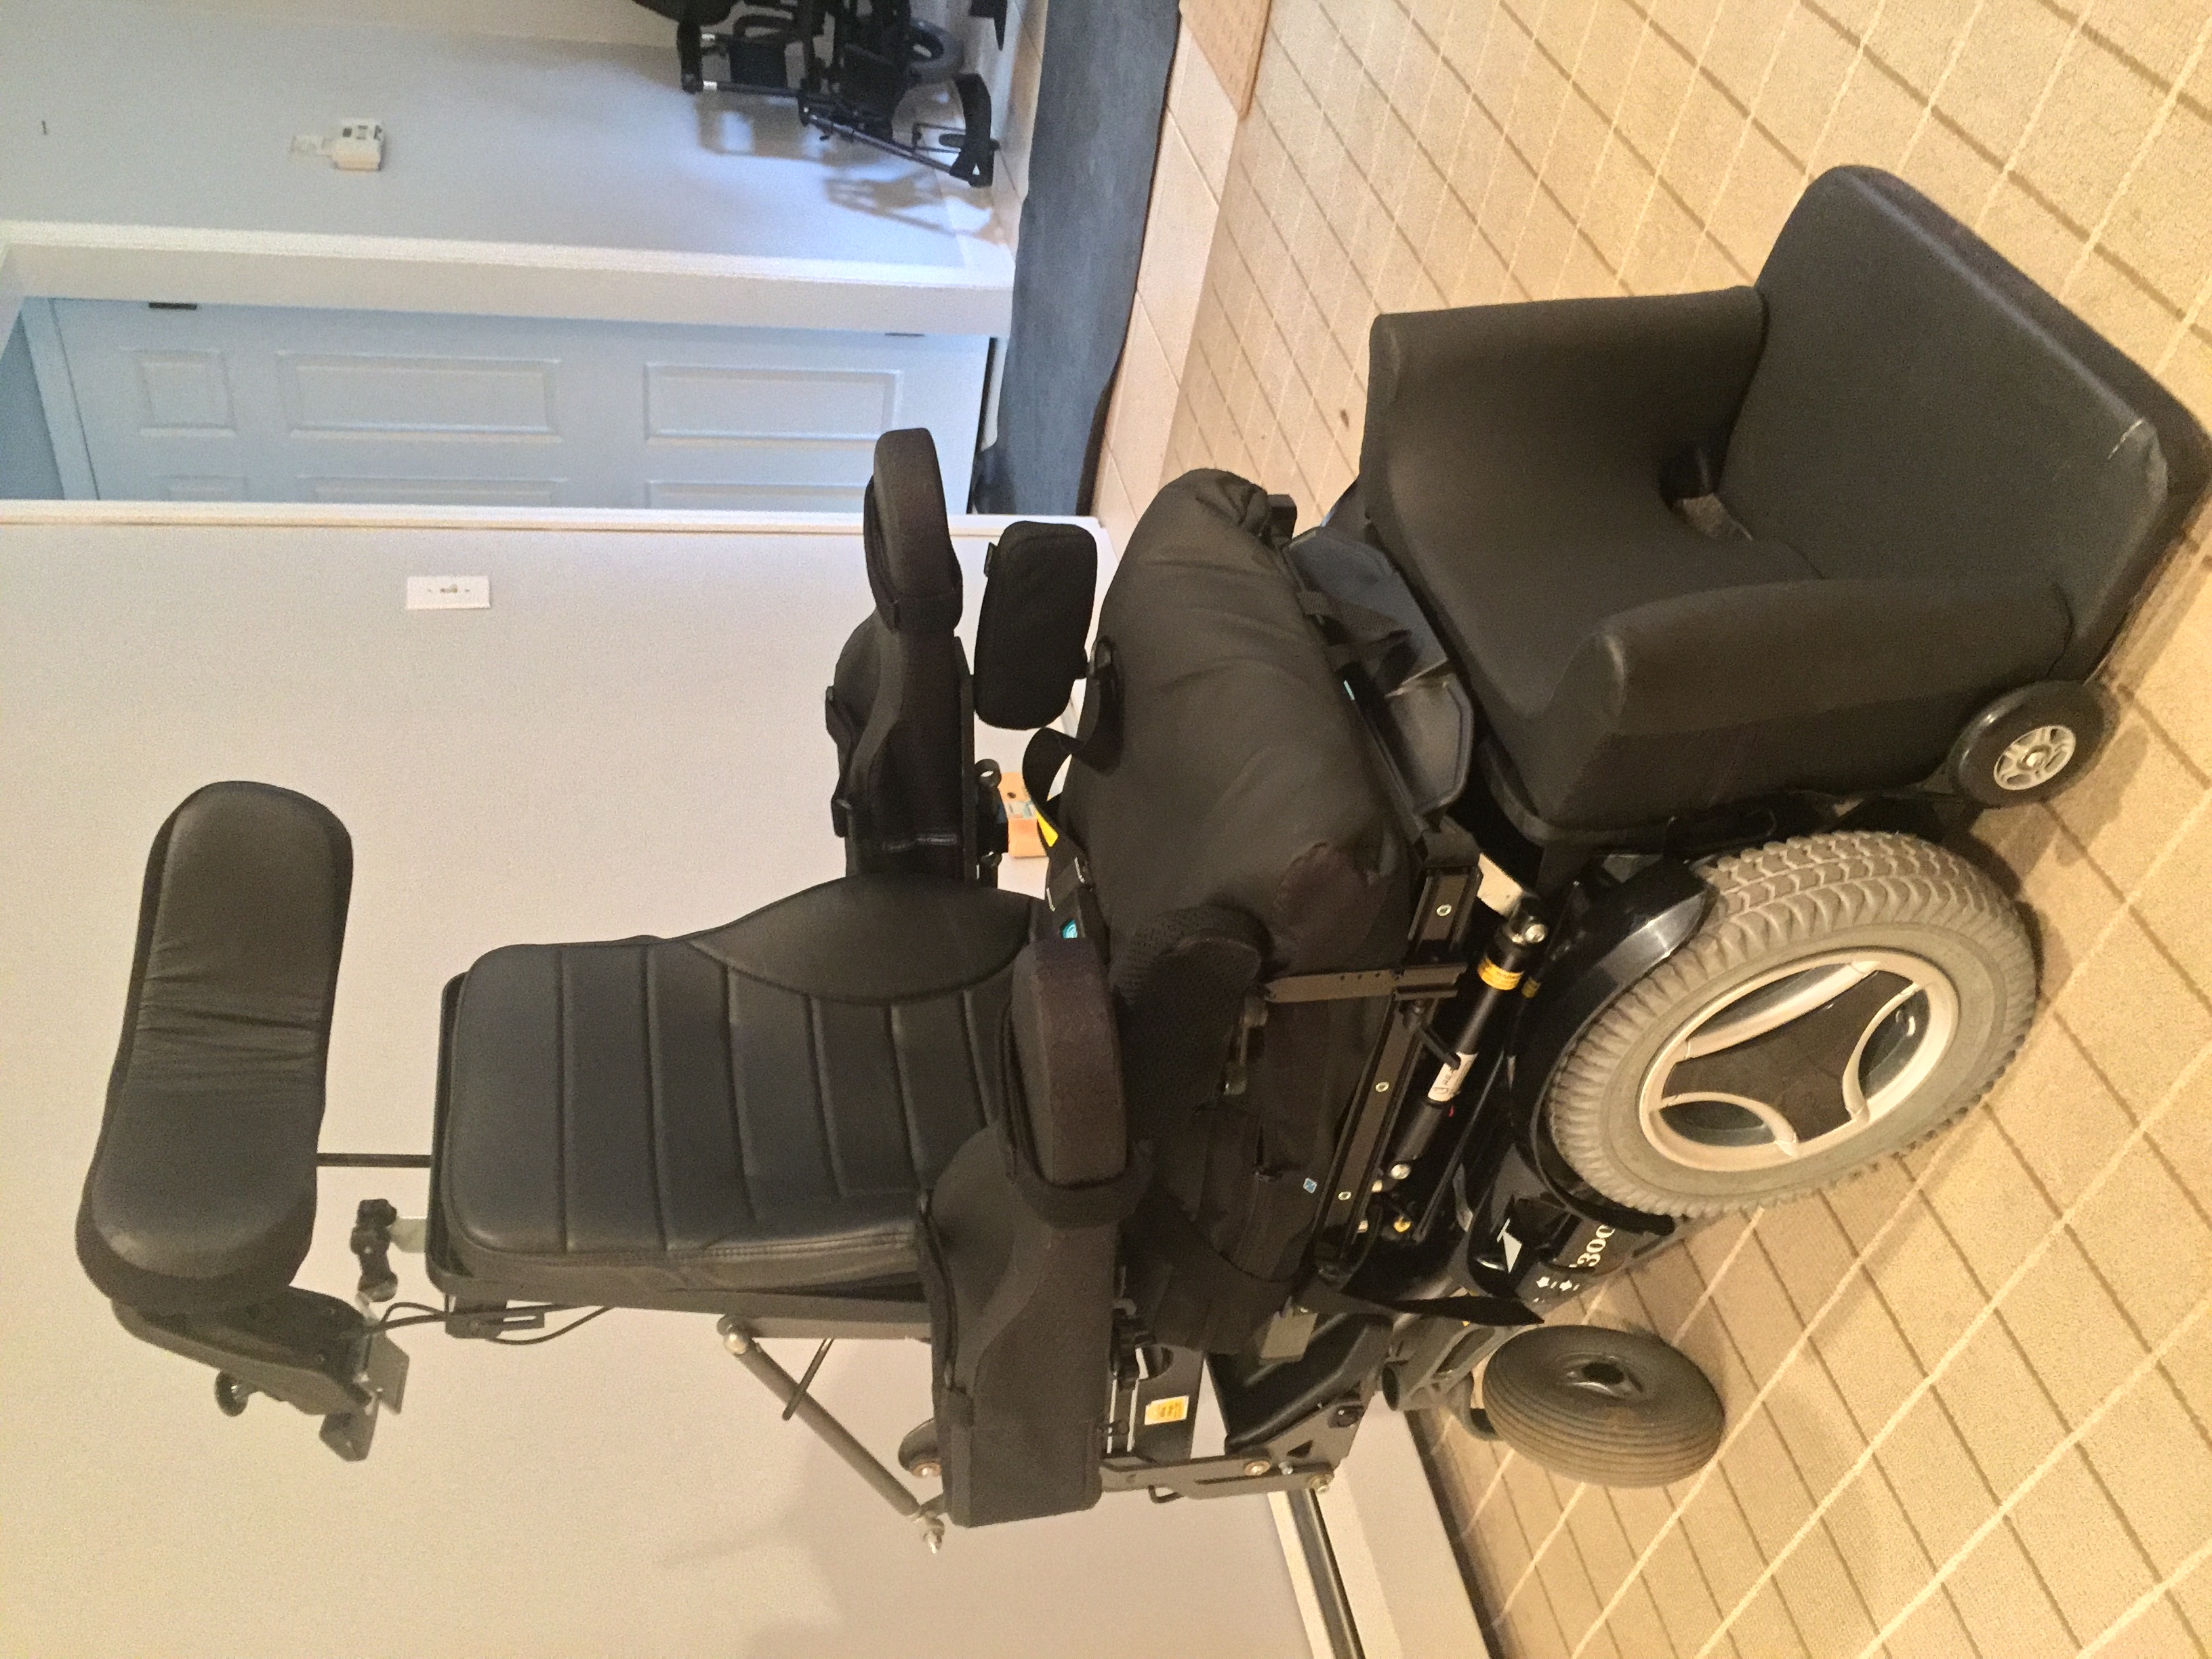 Permobil C300 like new - Buy & Sell Used Electric Wheelchairs, Mobility